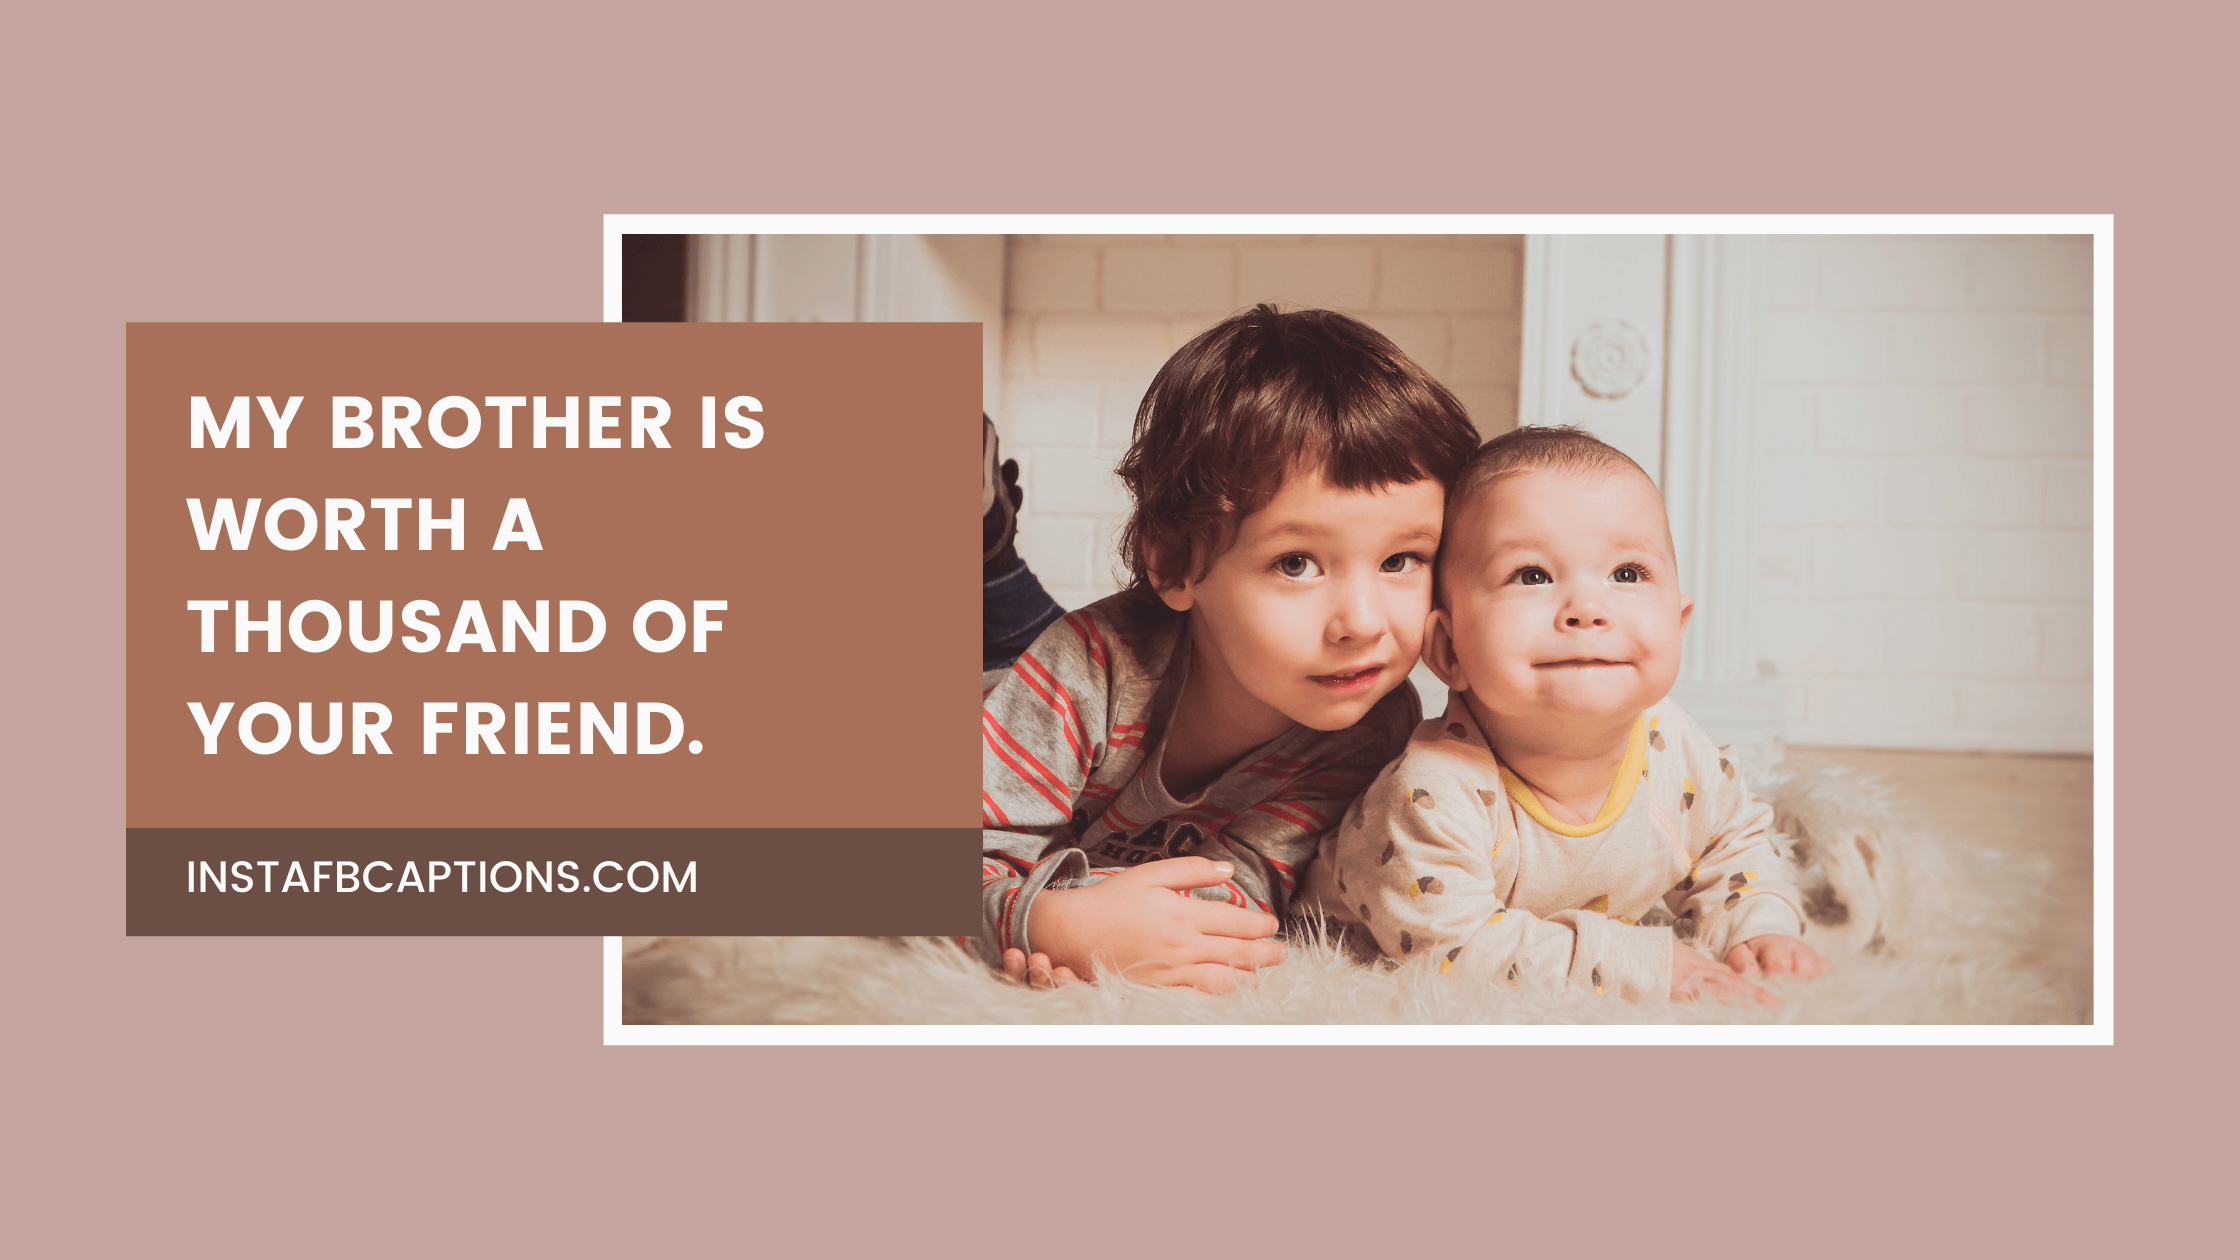 My brother is worth a thousand of your friend.  - Famous Brother Captions - [New Quotes] 150+ Brother Captions for Instagram 2023